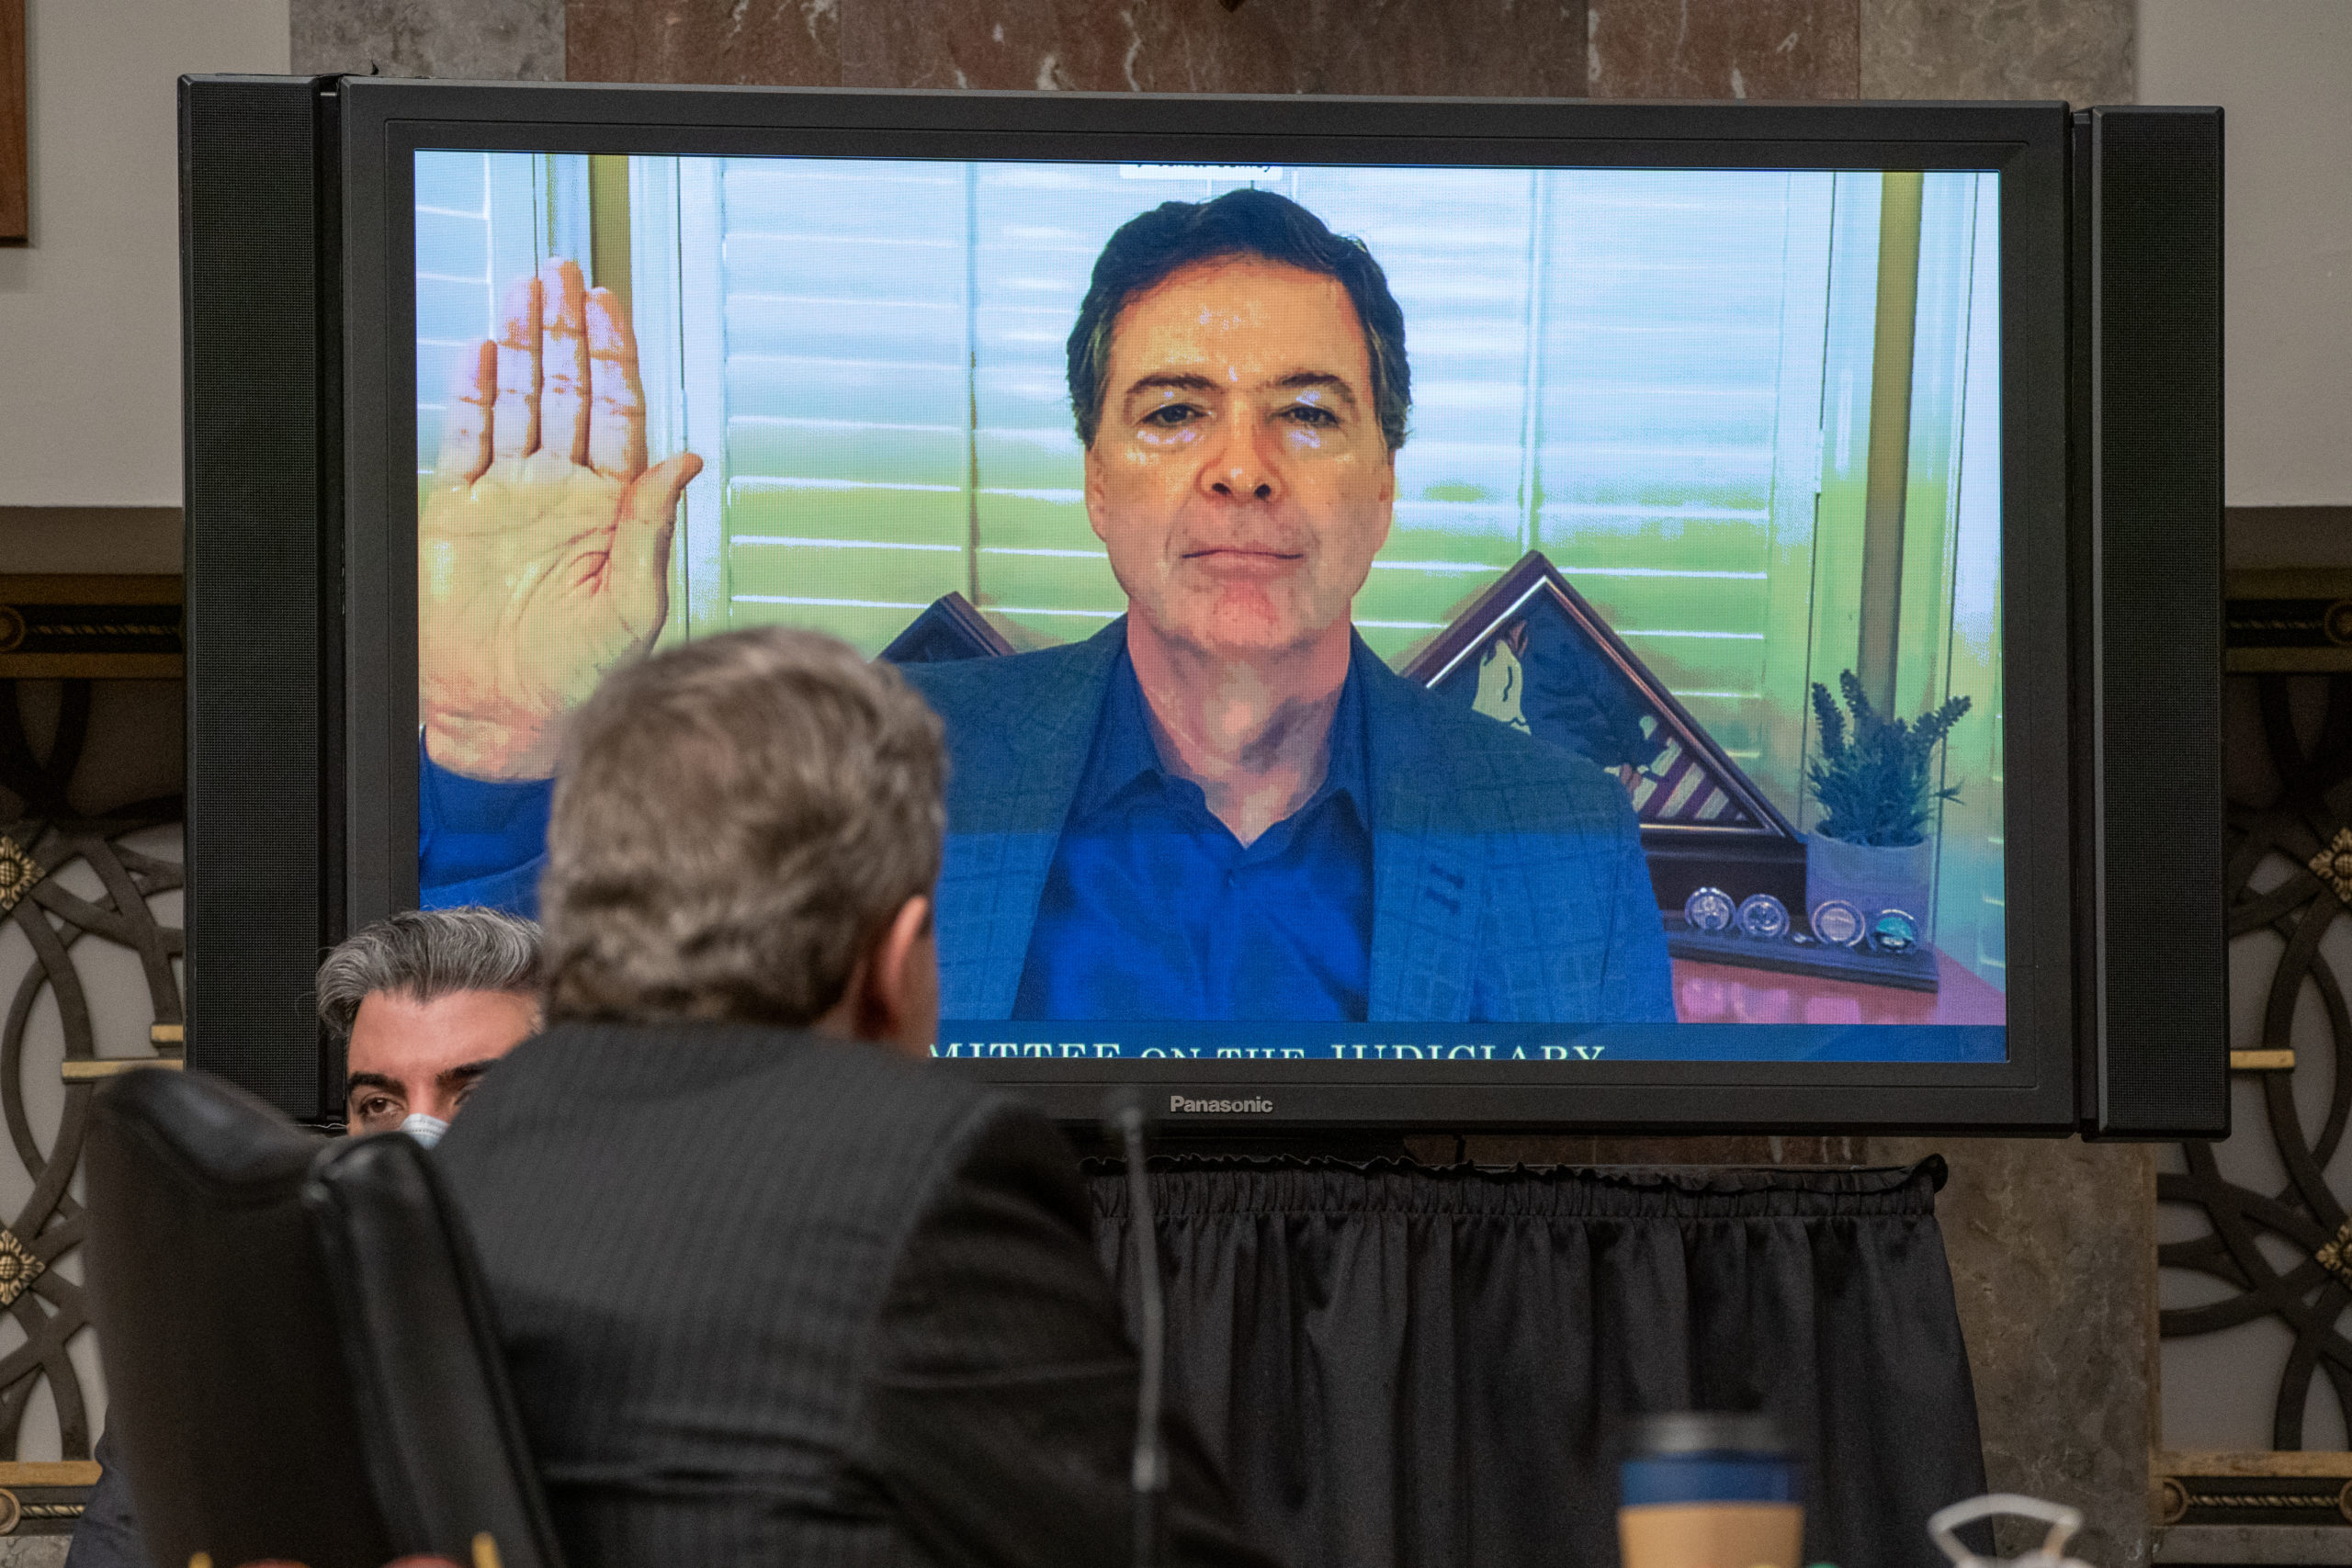 WASHINGTON, DC - SEPTEMBER 30: Former FBI Director James Comey is sworn in remotely at a hearing of the Senate Judiciary Committee on September 30, 2020 in Washington, DC. Comey was testifying in the committee's probe into the origins of the investigation into Russian interference in the 2016 election. (Photo by Ken Cedeno-Pool/Getty Images)